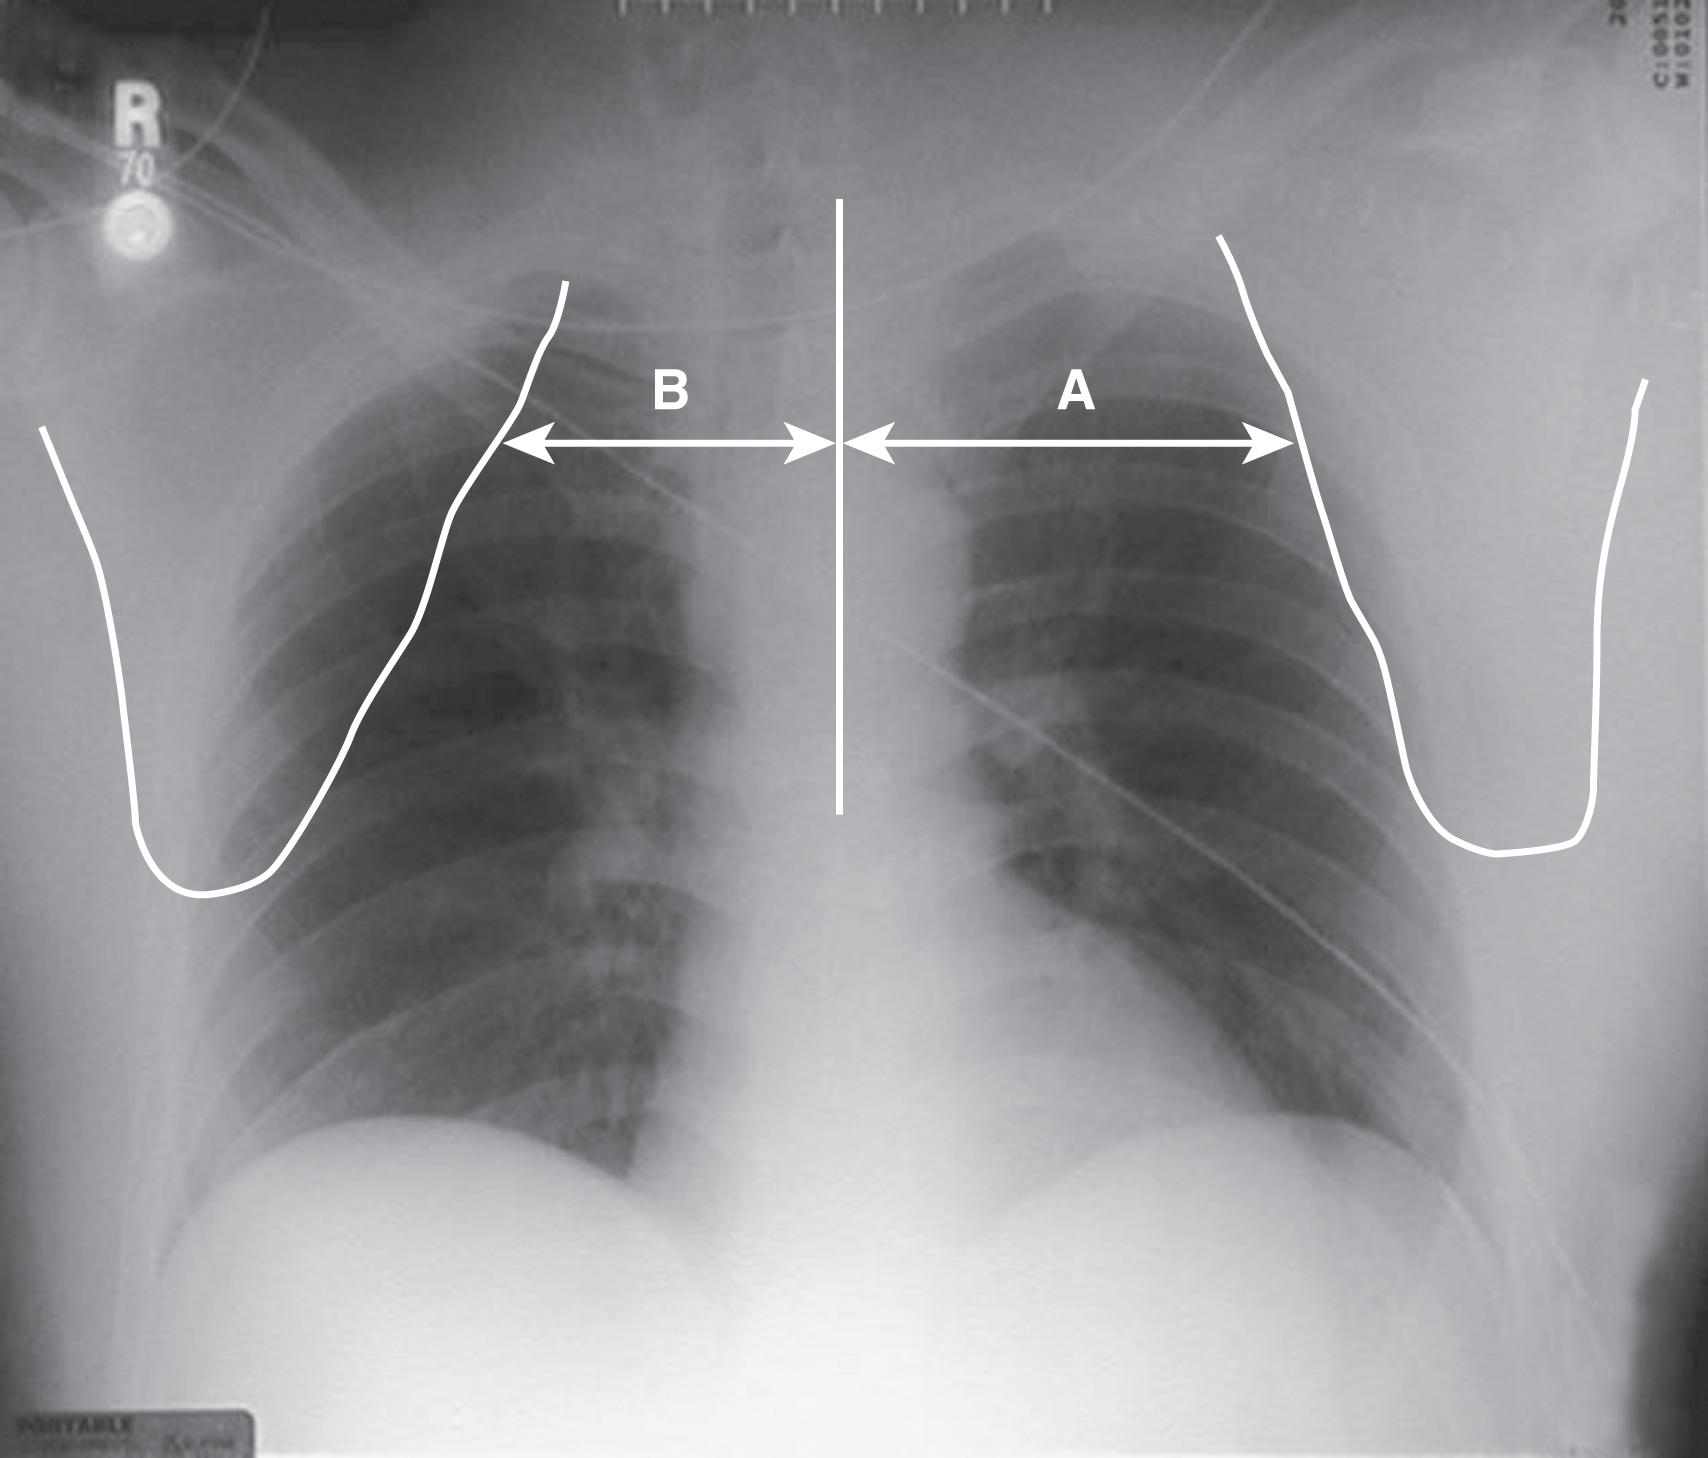 FIGURE 3, Anteroposterior chest radiograph demonstrating measurements to calculate the scapula index (A/B).